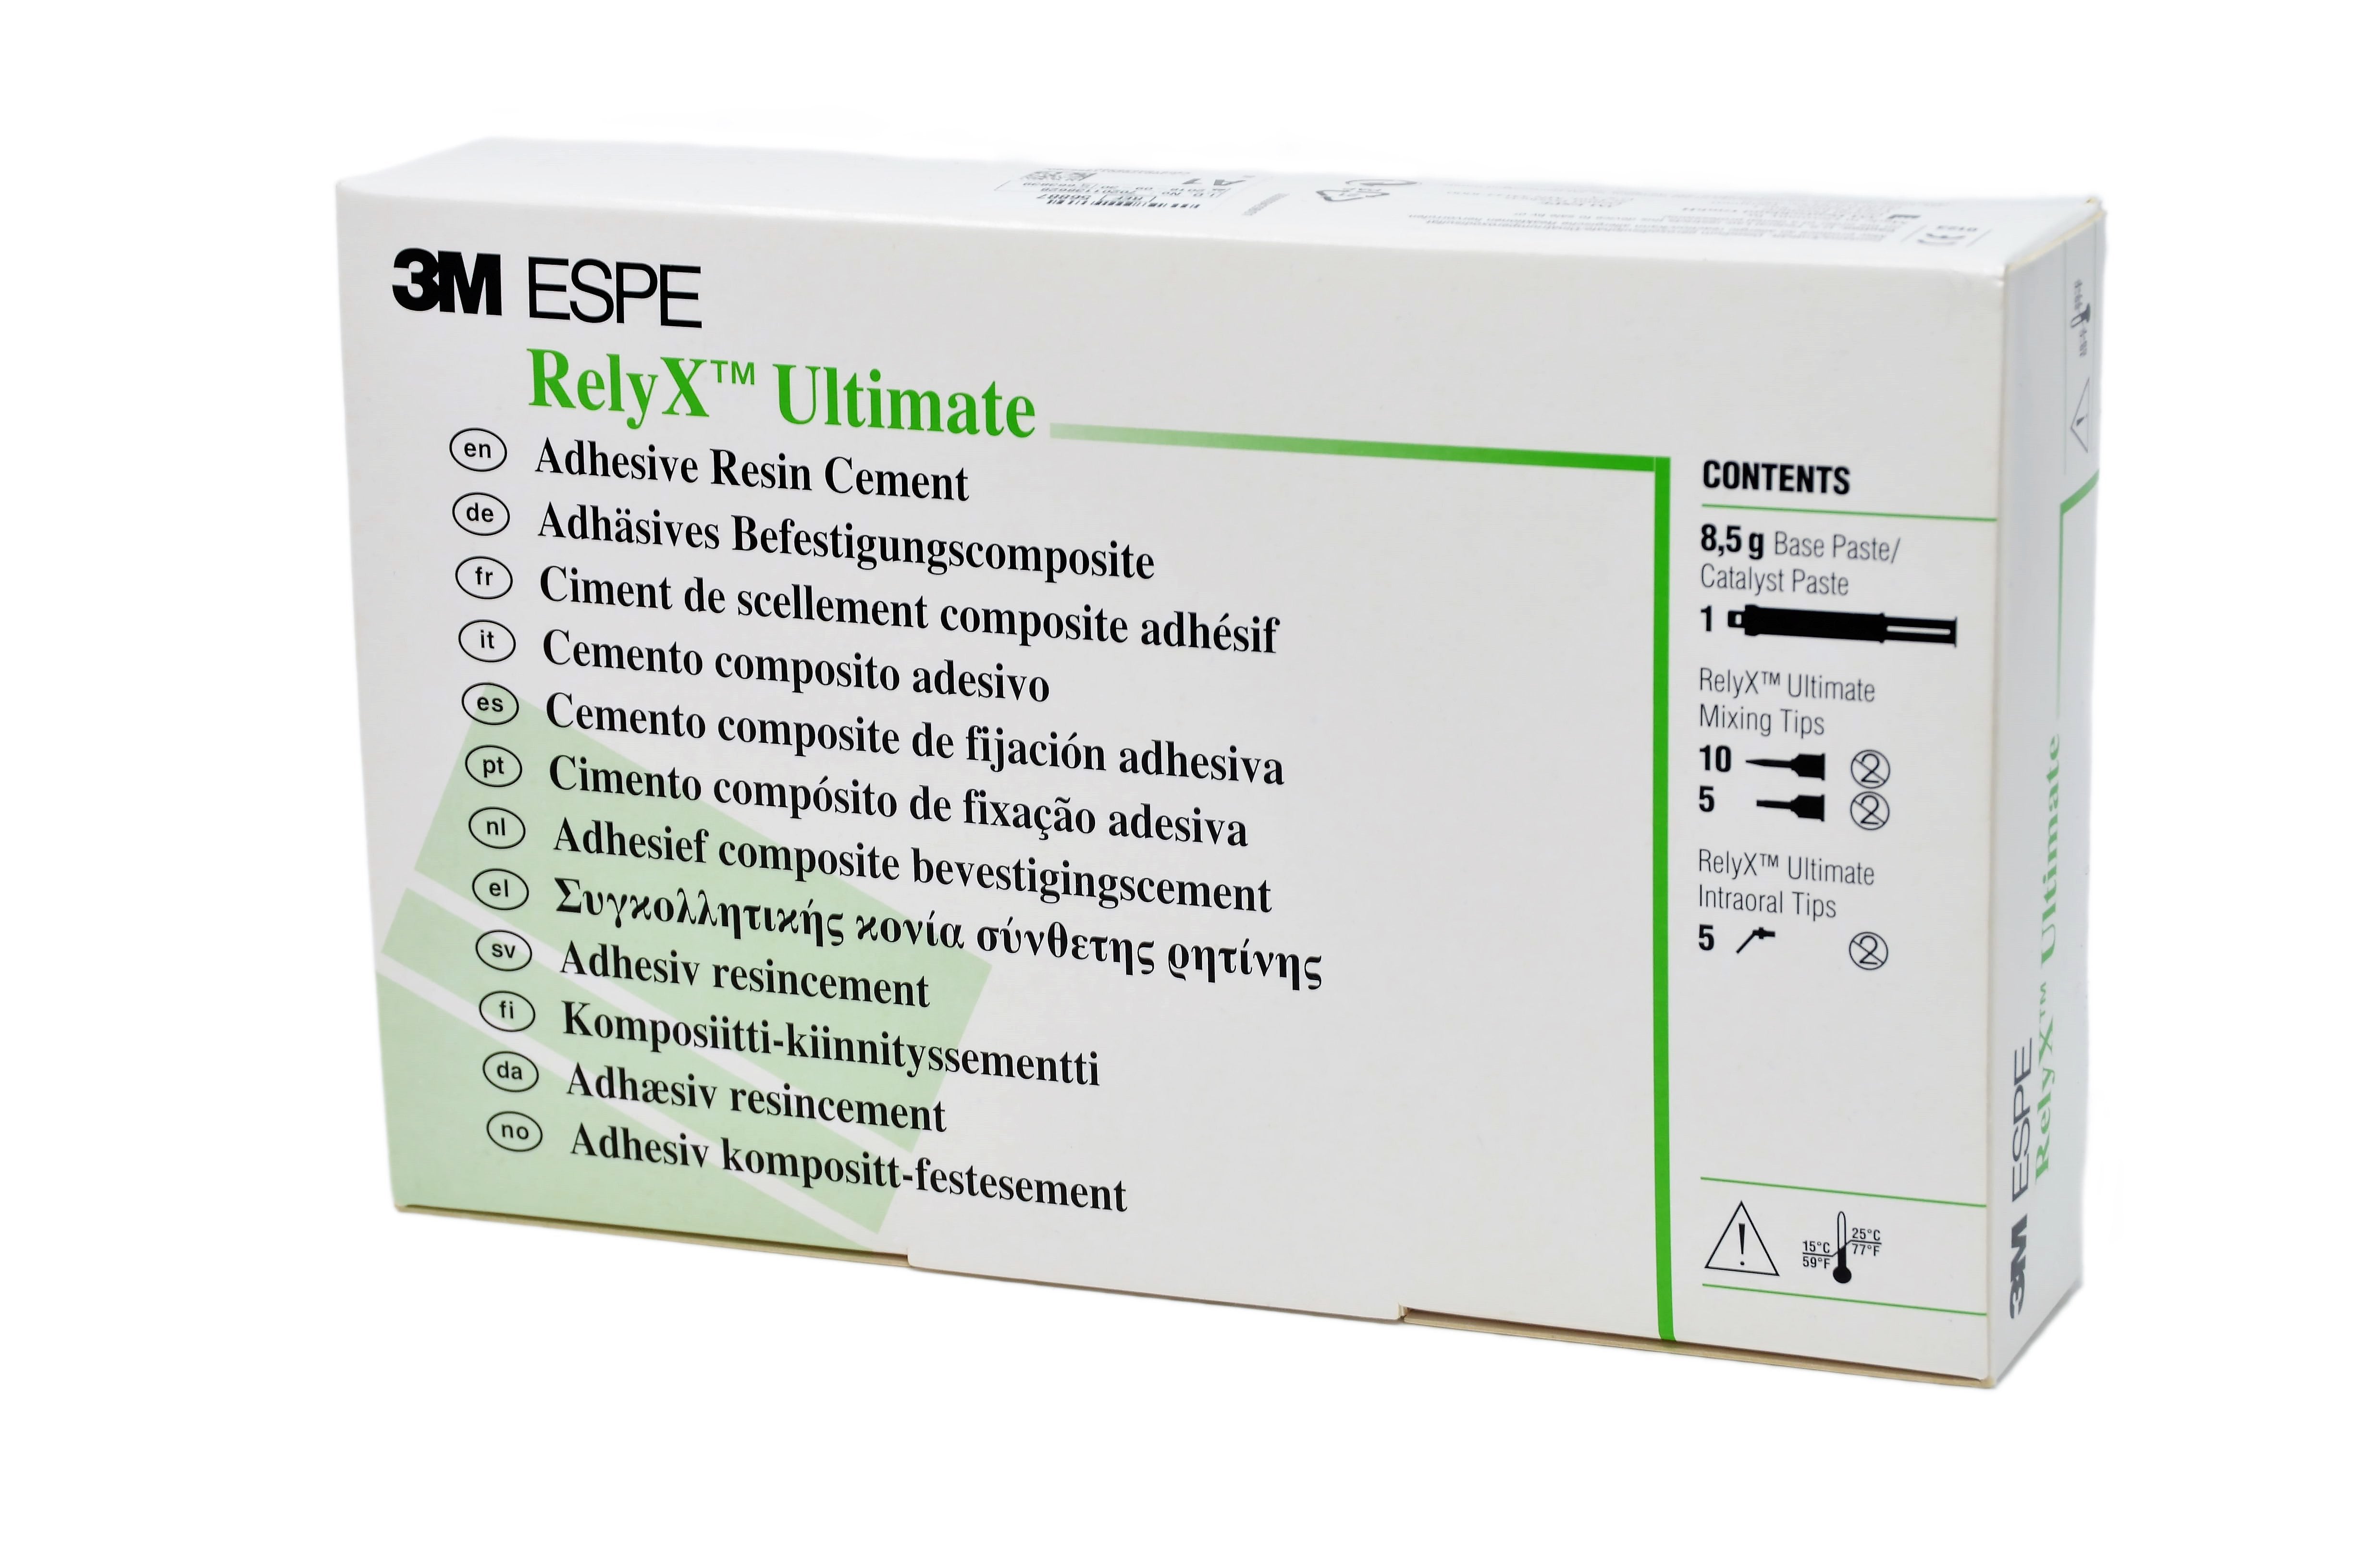 3M ESPE 56887 RelyX Ultimate Adhesive Resin Cement Syringe